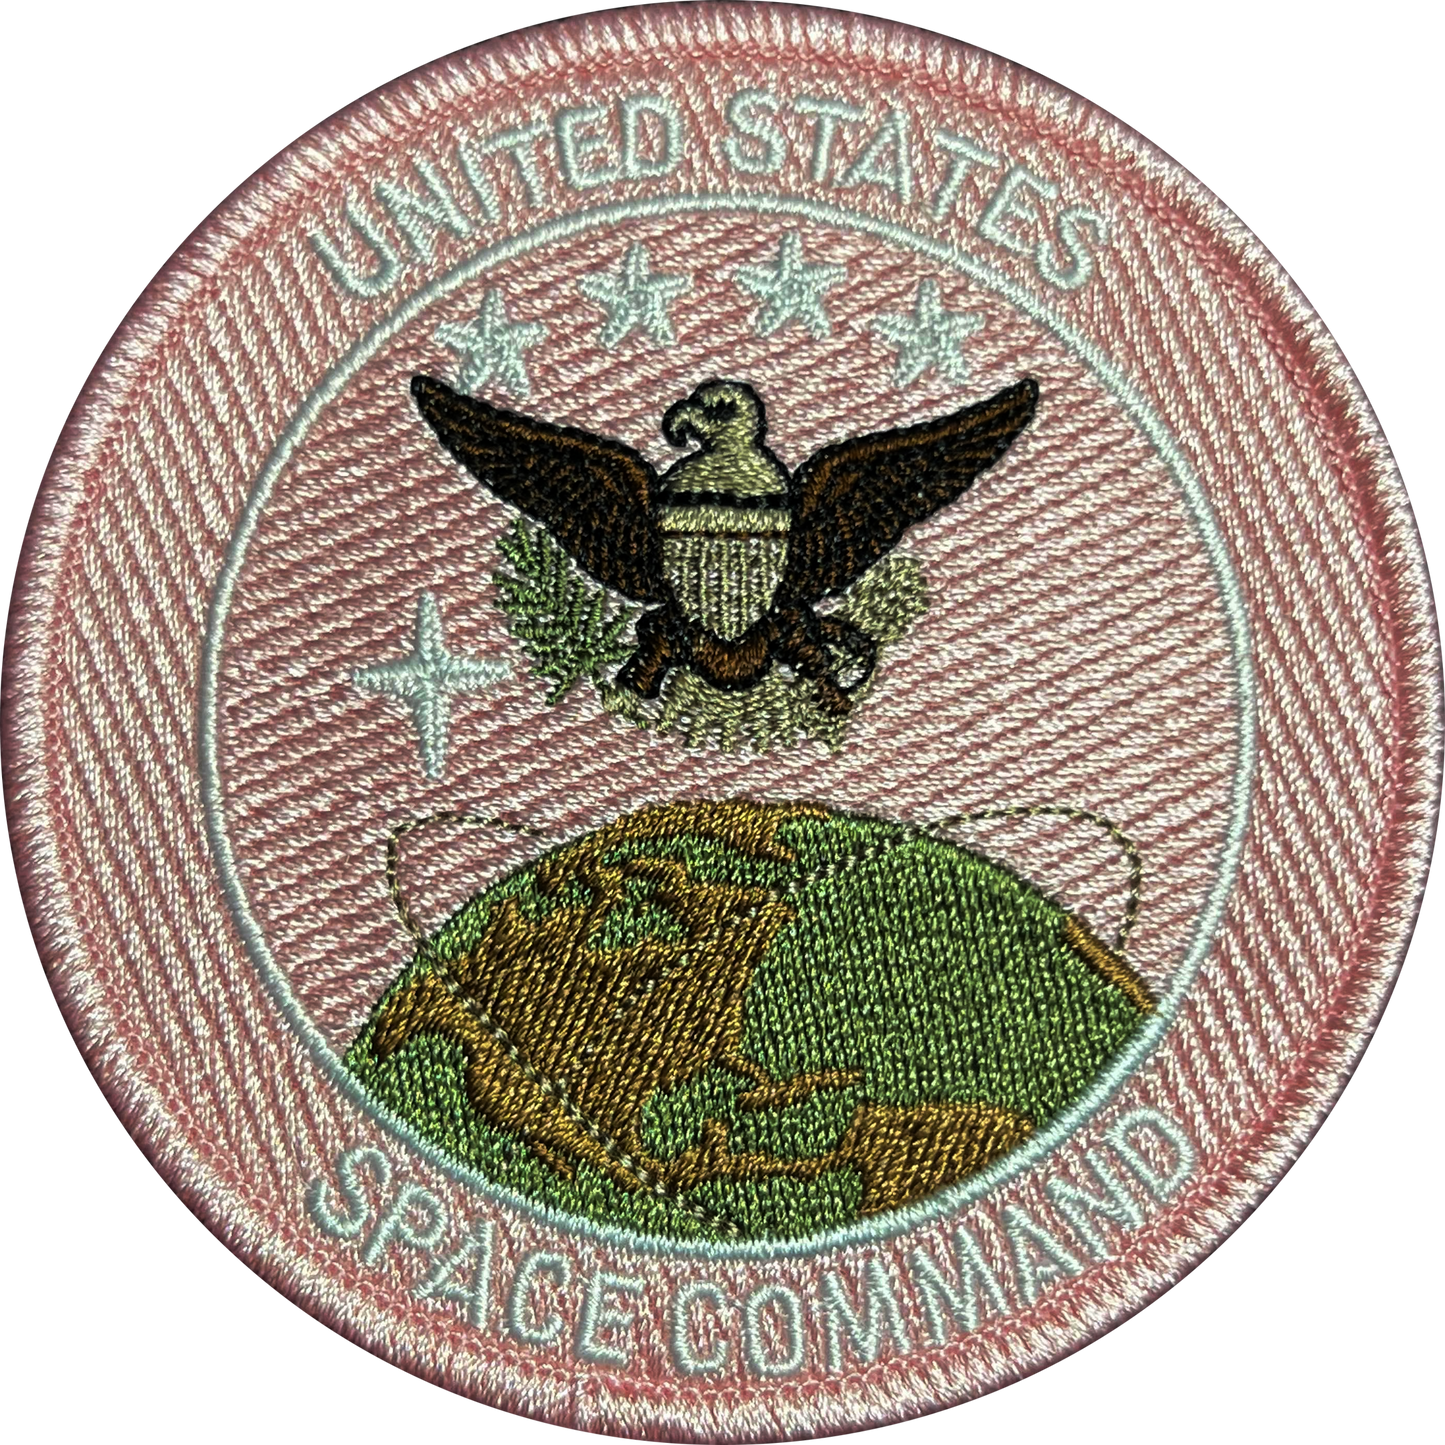 DL1-11 United States Space Command Pink Patch U.S. Space Force Breast Cancer Awareness